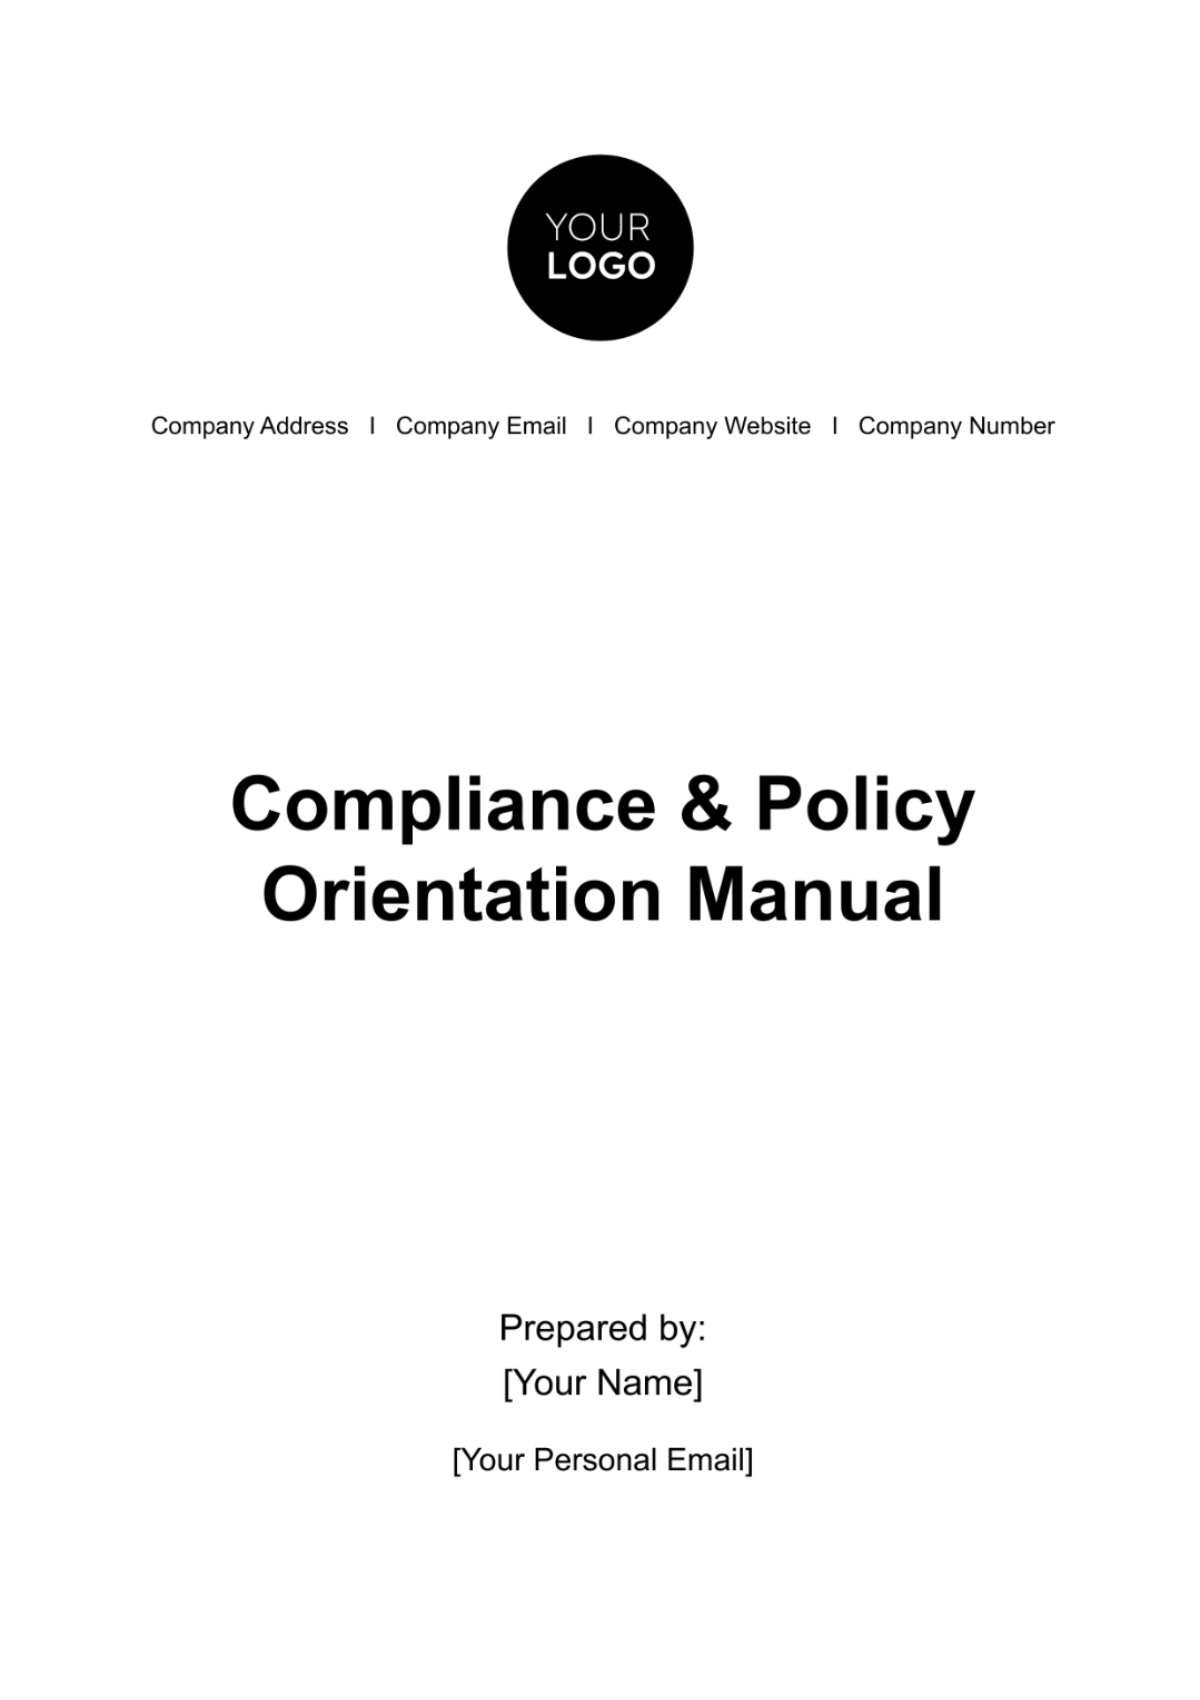 Free Compliance & Policy Orientation Manual HR Template